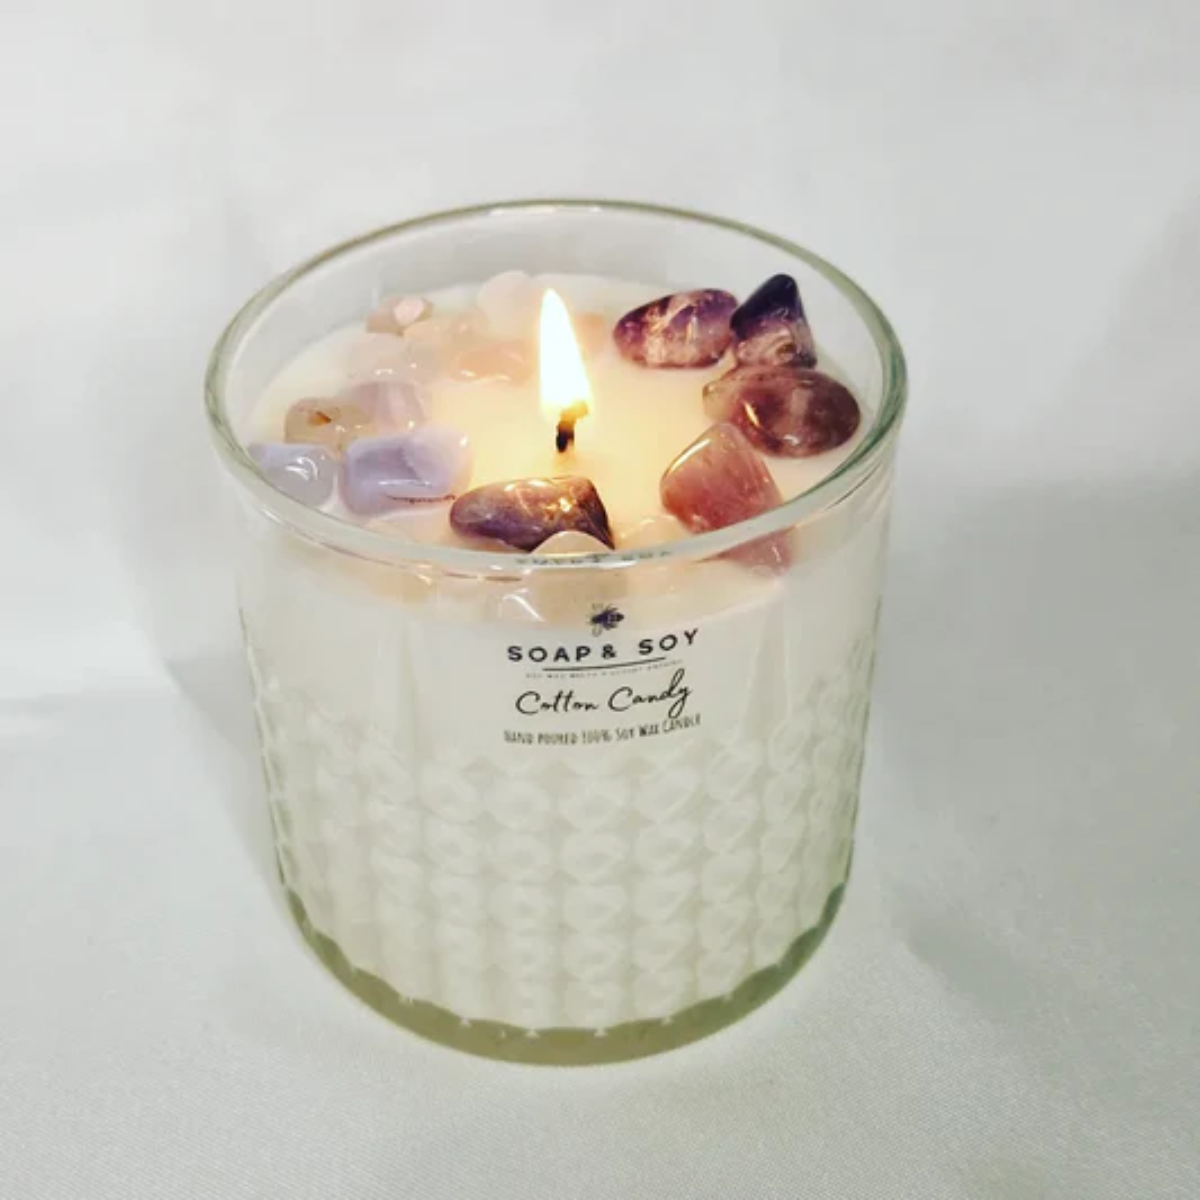 25. Bring Love and Energy to Your 15th Anniversary with a Crystal-Infused Scented Candle